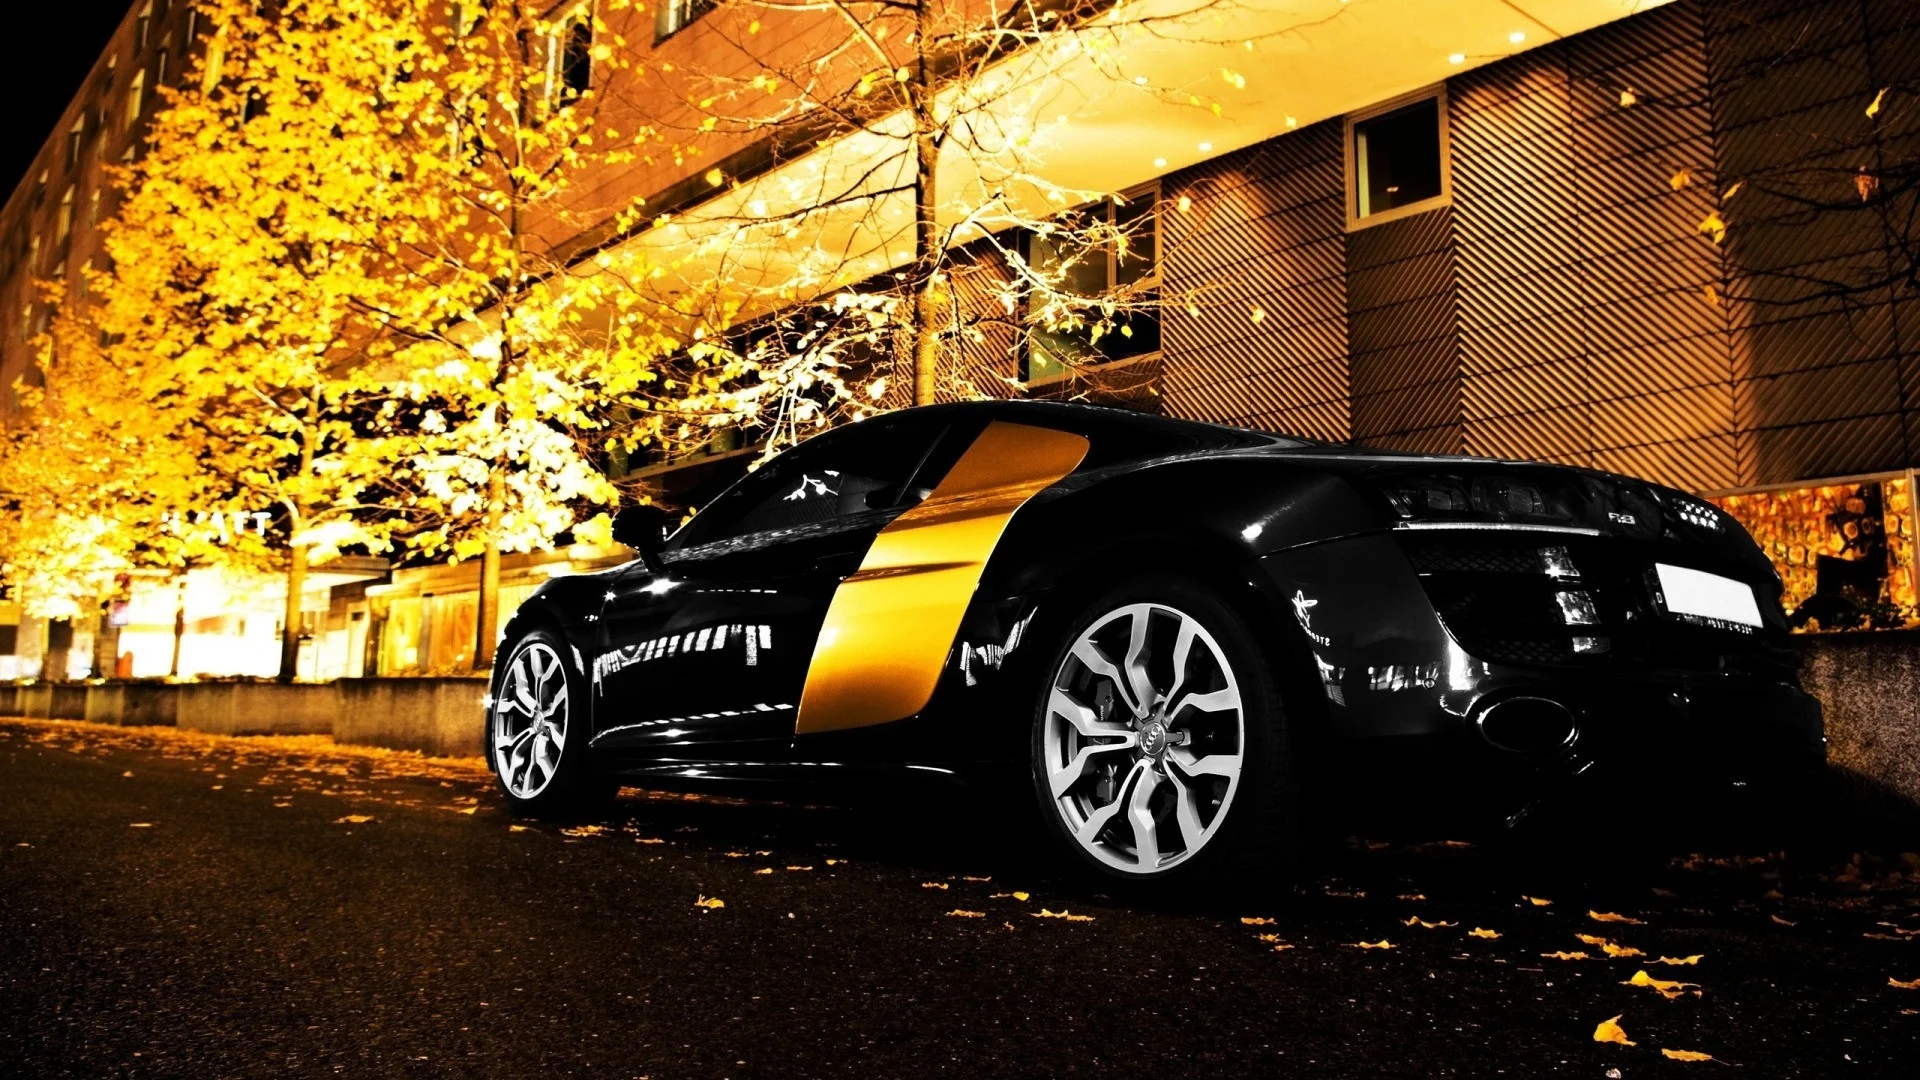 Awesome Audi R8 Sport HD Wallpapers 1080p Cars